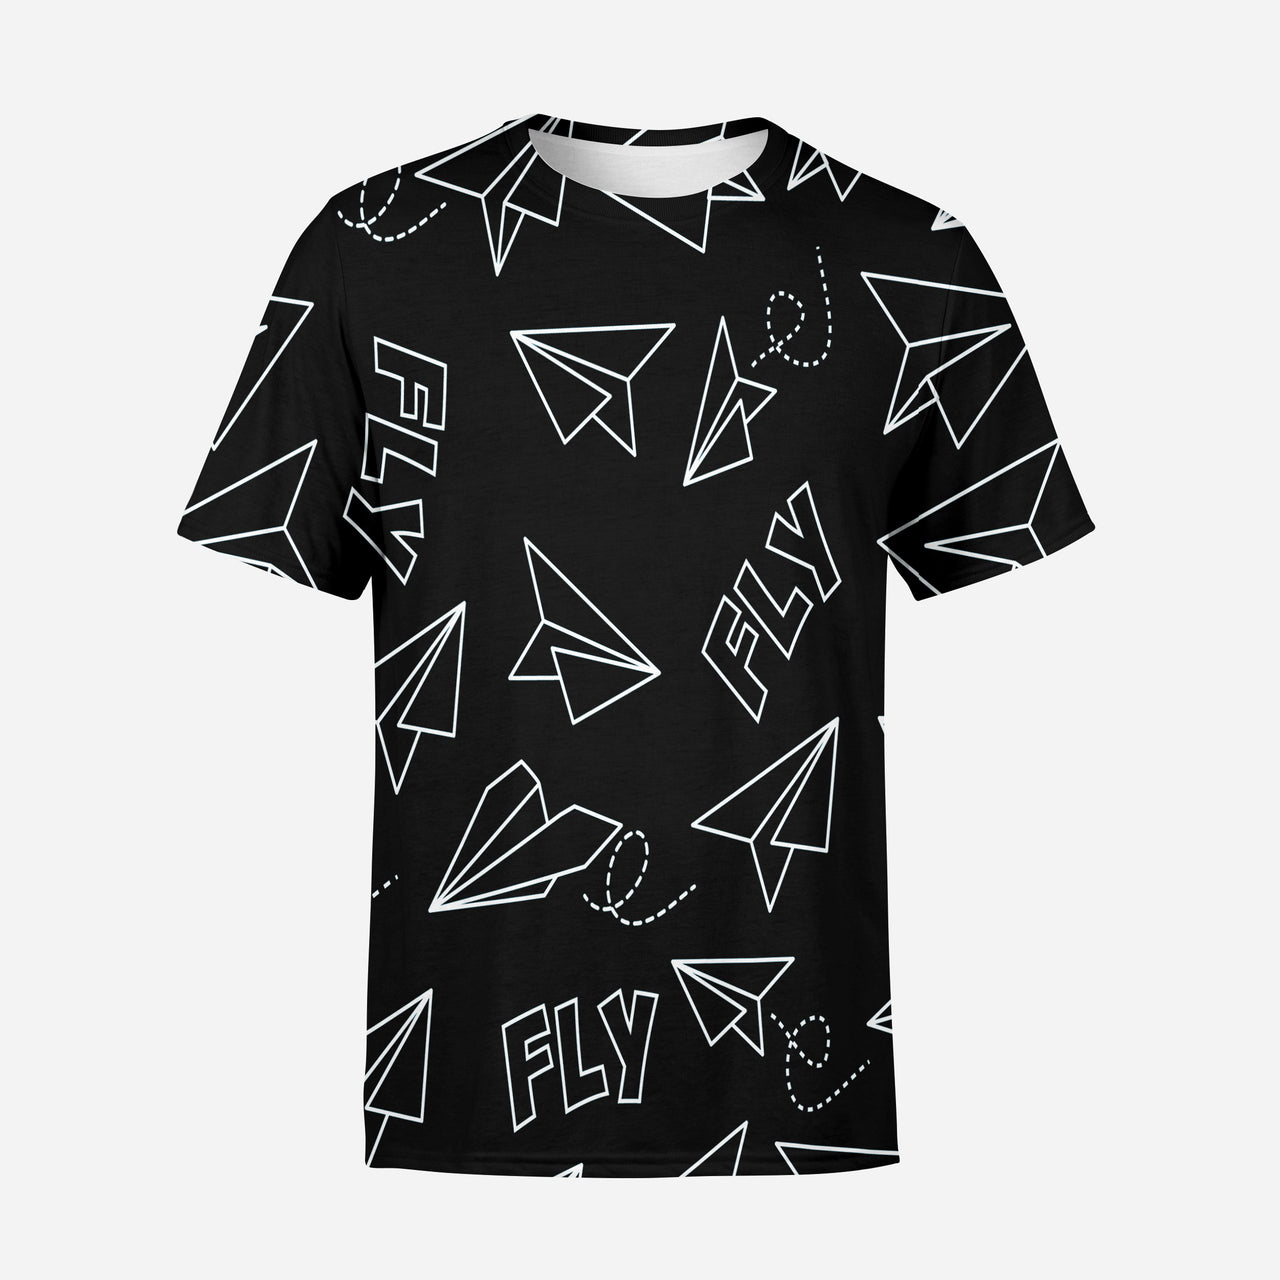 Paper Airplane & Fly Black Designed 3D T-Shirts